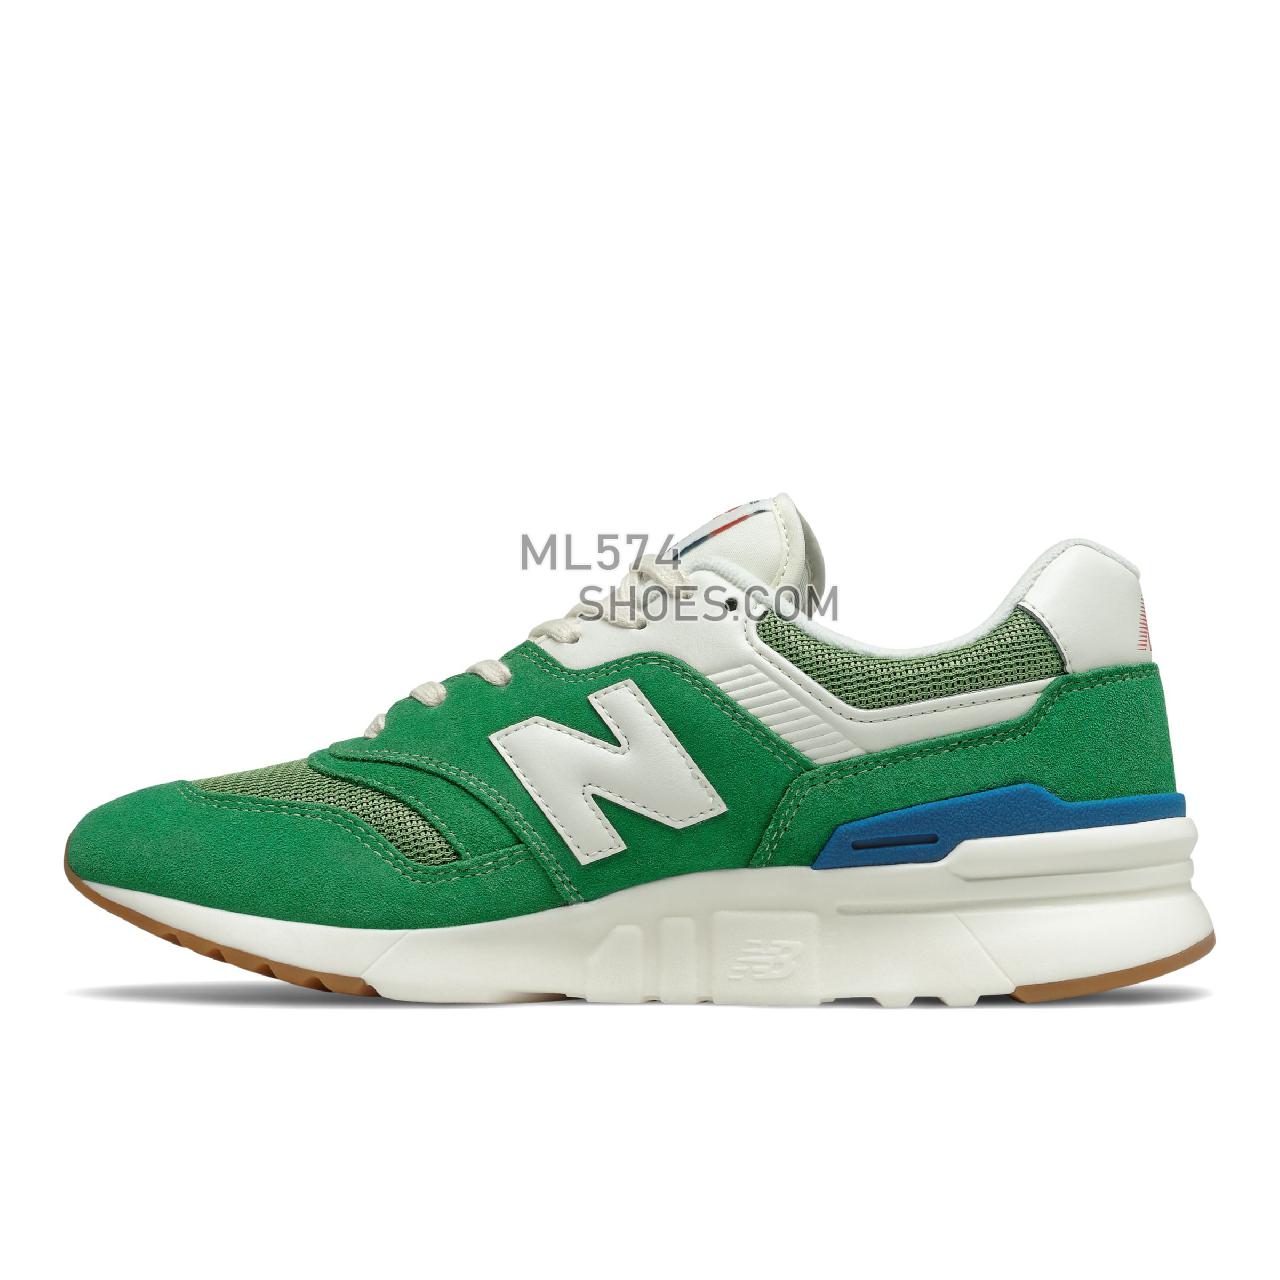 New Balance 997H - Men's Classic Sneakers - Varsity Green with Light Rogue Wave - CM997HRL